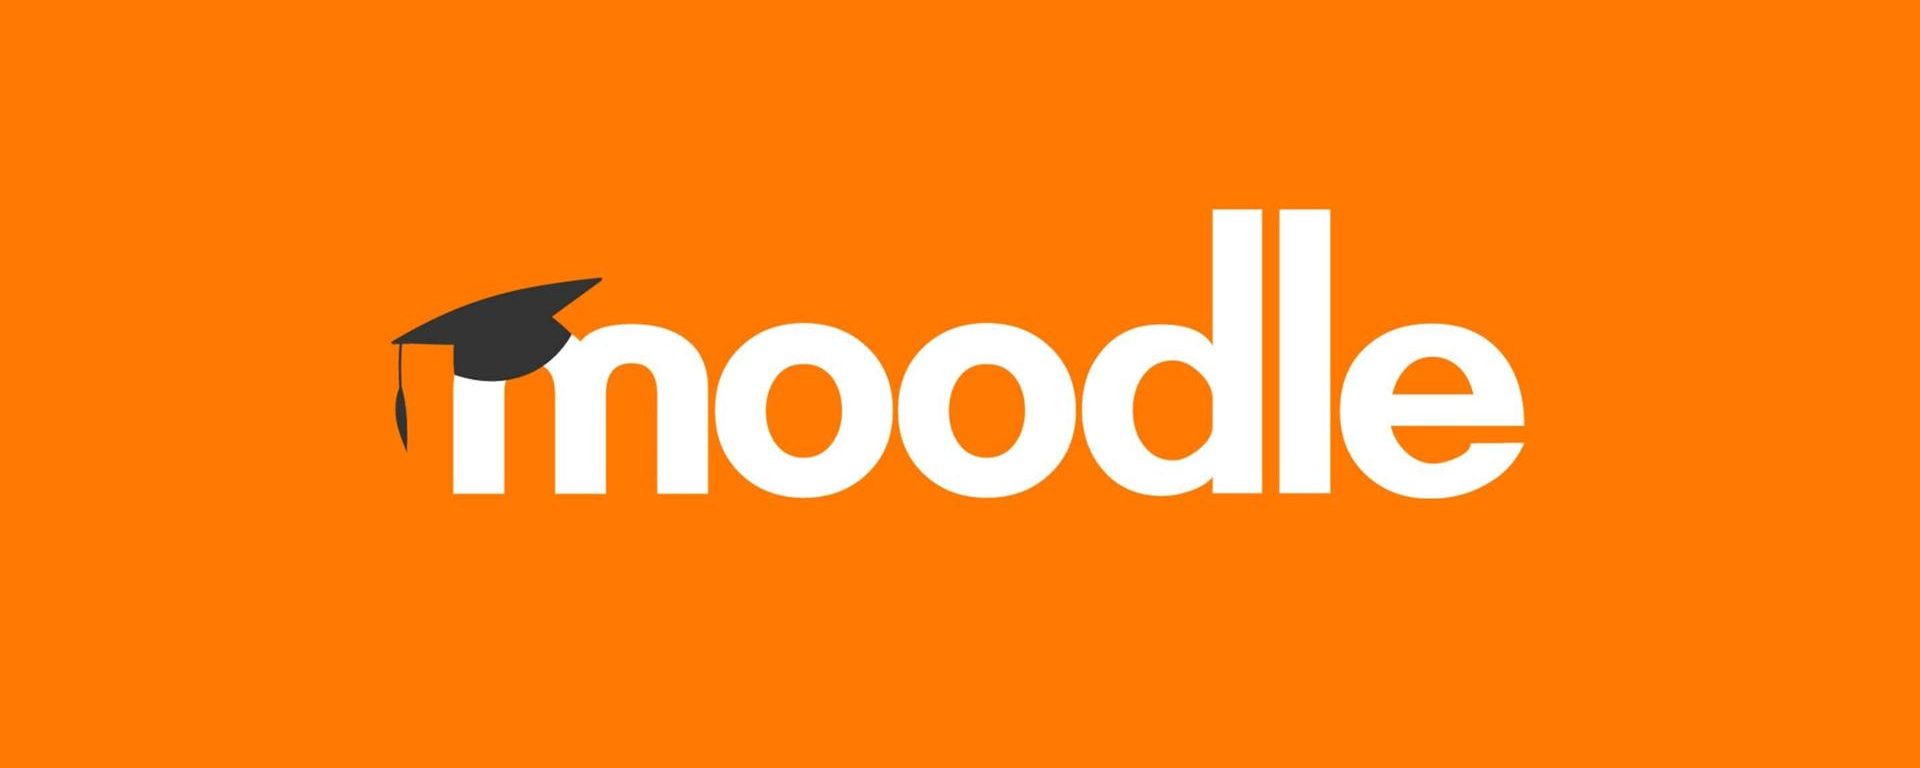 A cover image with the moodle logo